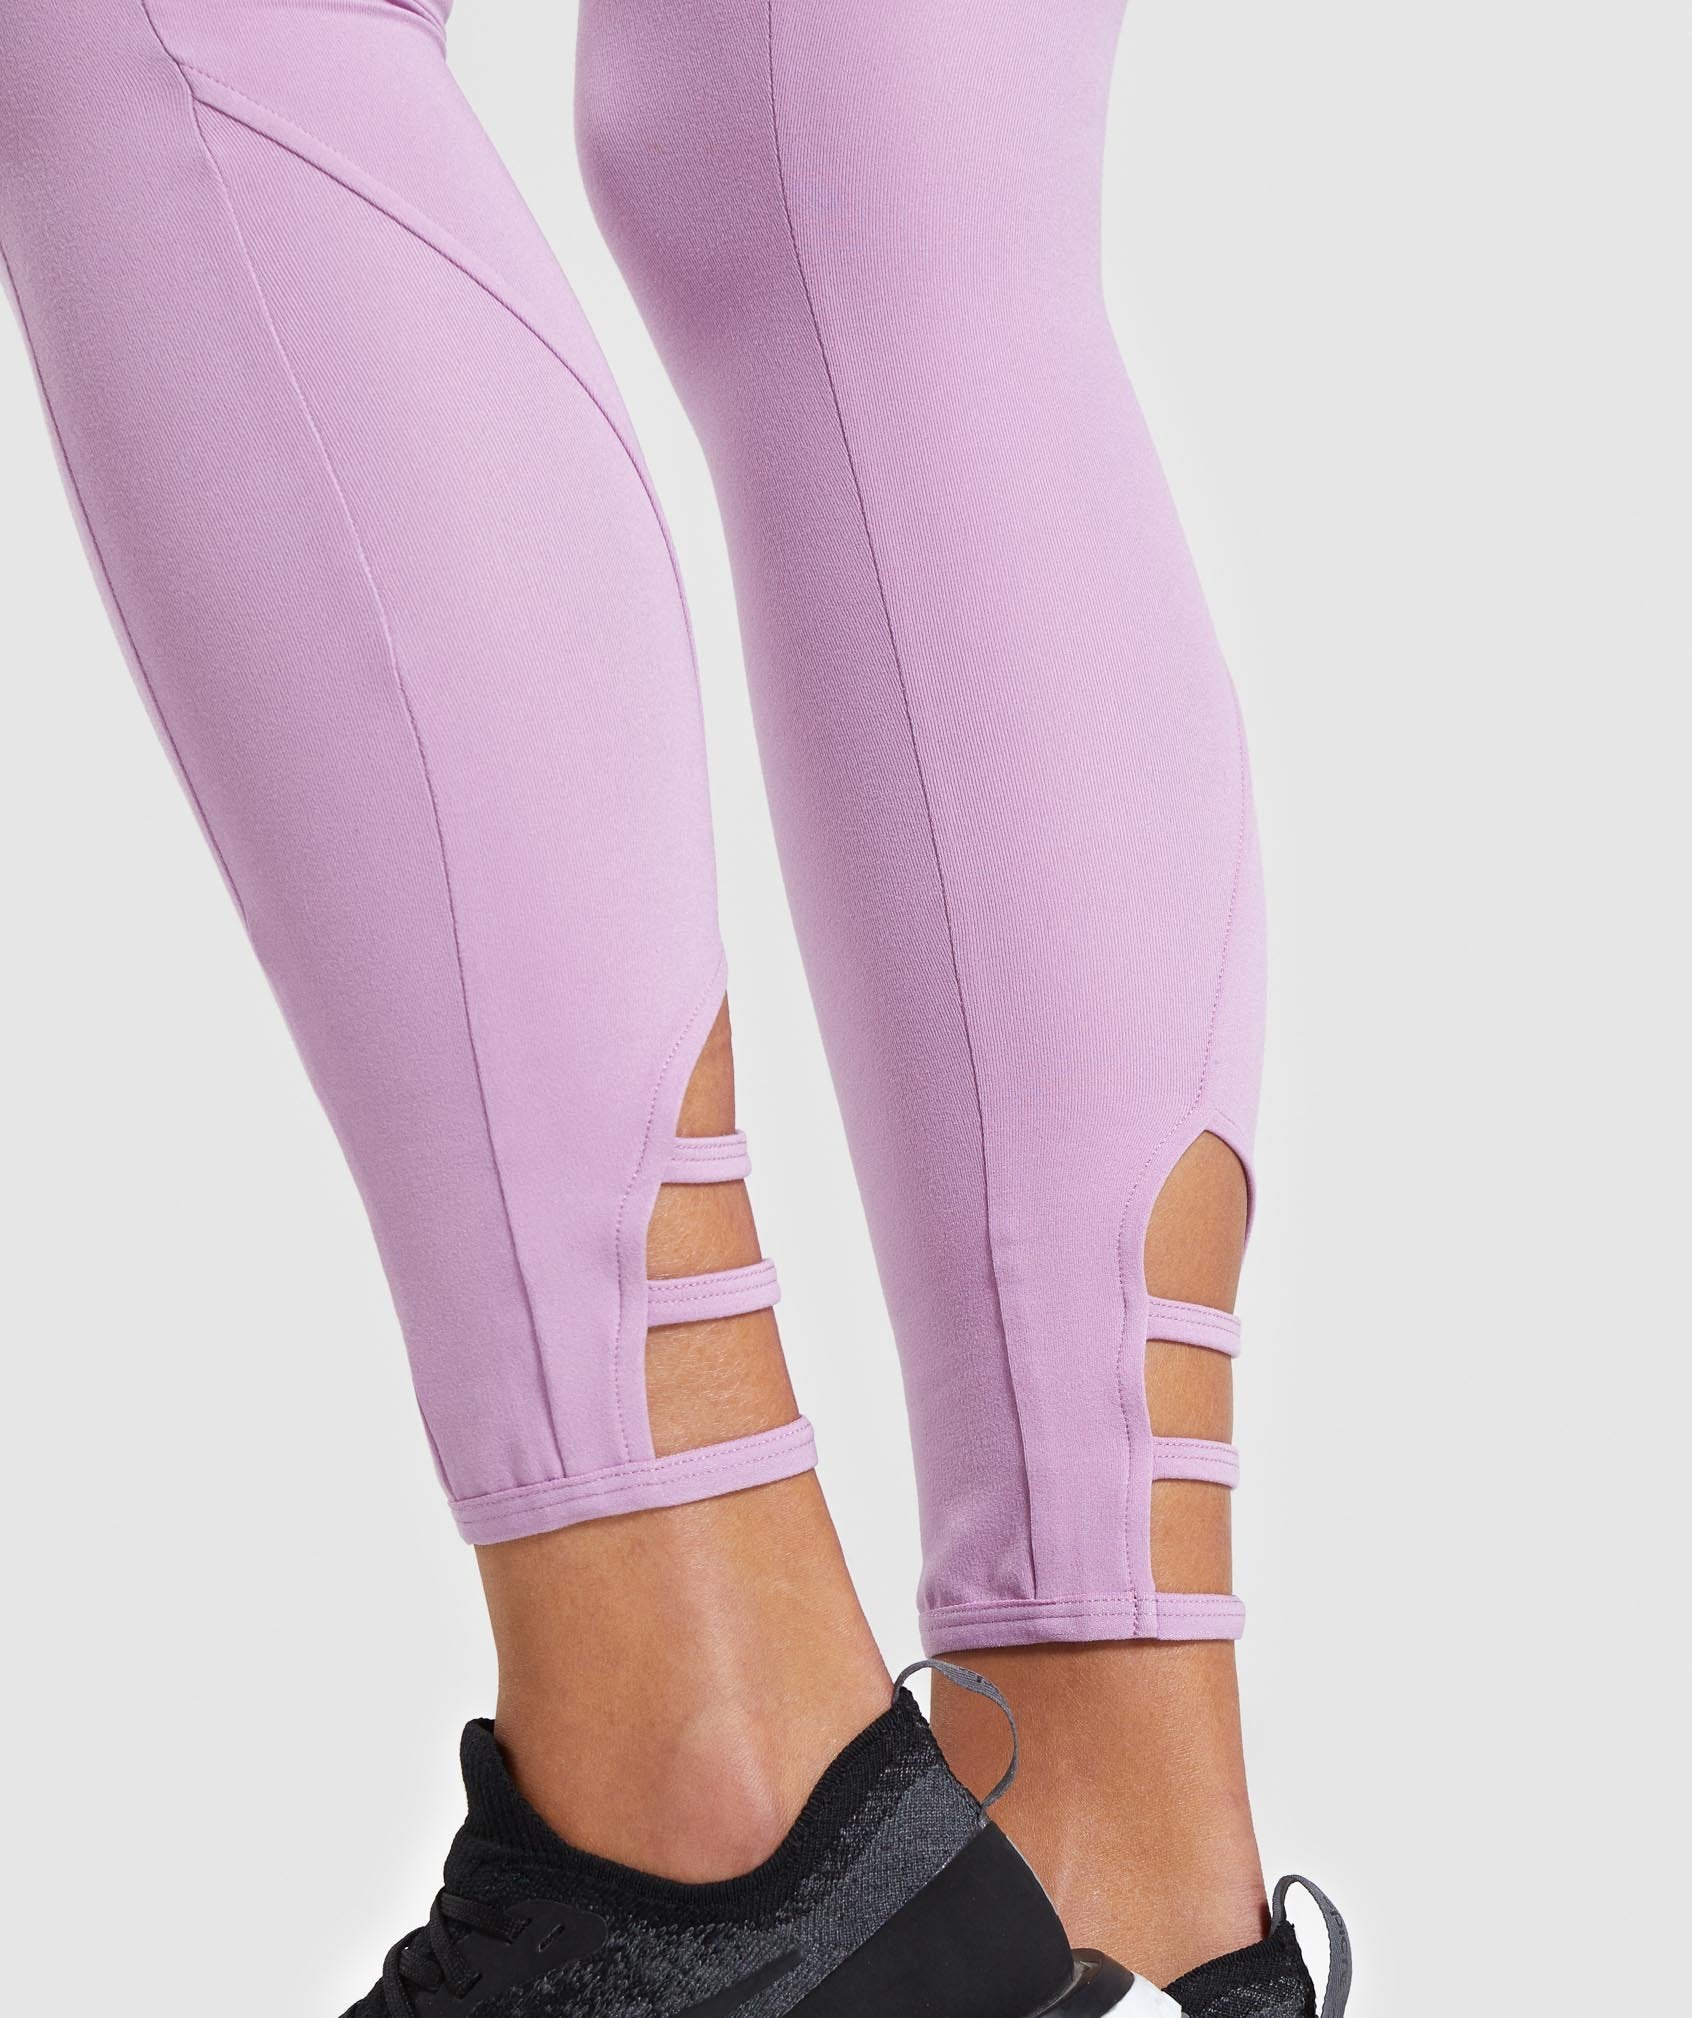 Poise Leggings in Pink - view 5